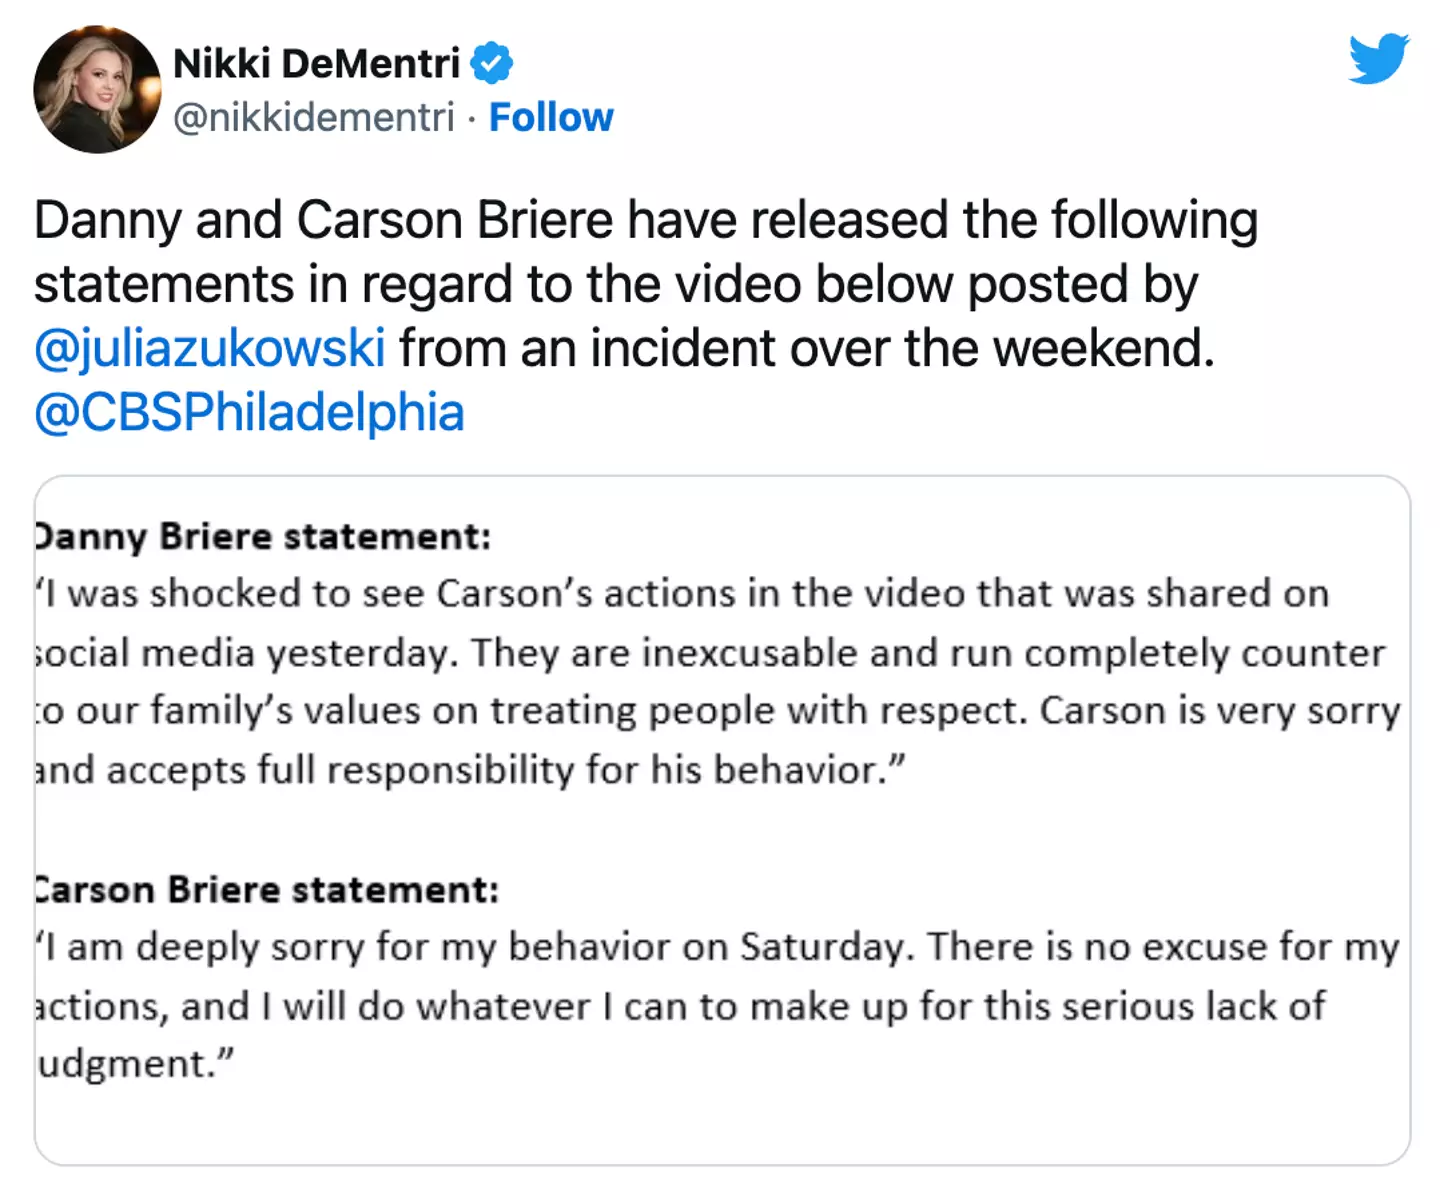 Briere commented on his actions in a statement.